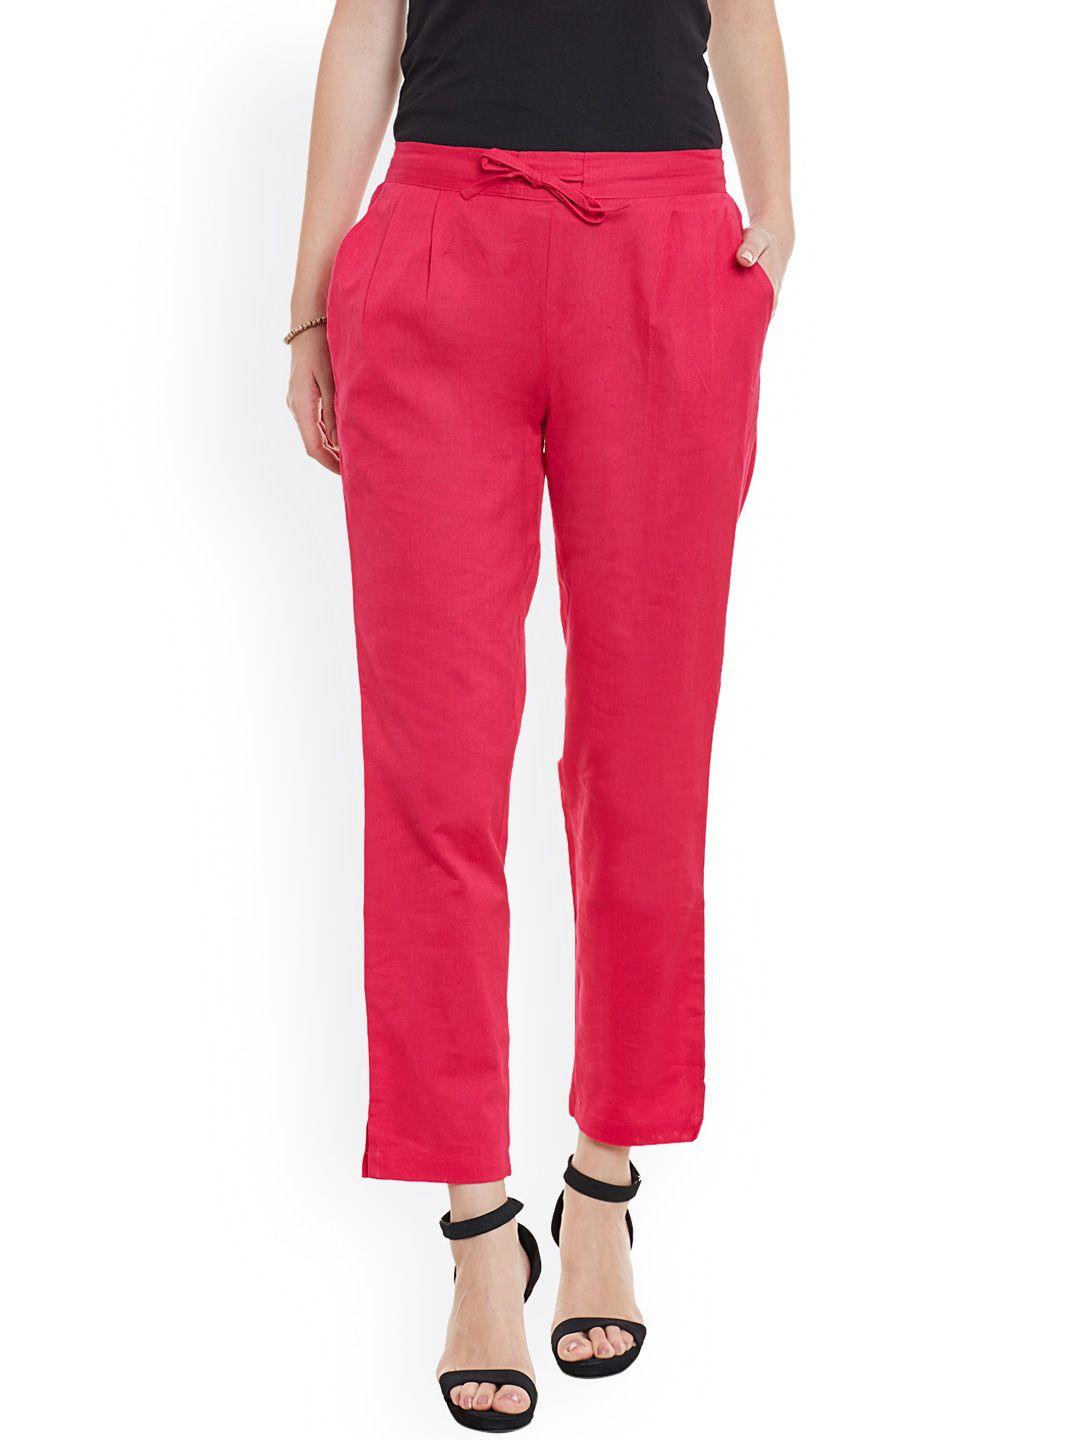 bitterlime-women-pink-solid-regular-fit-pleated-trousers